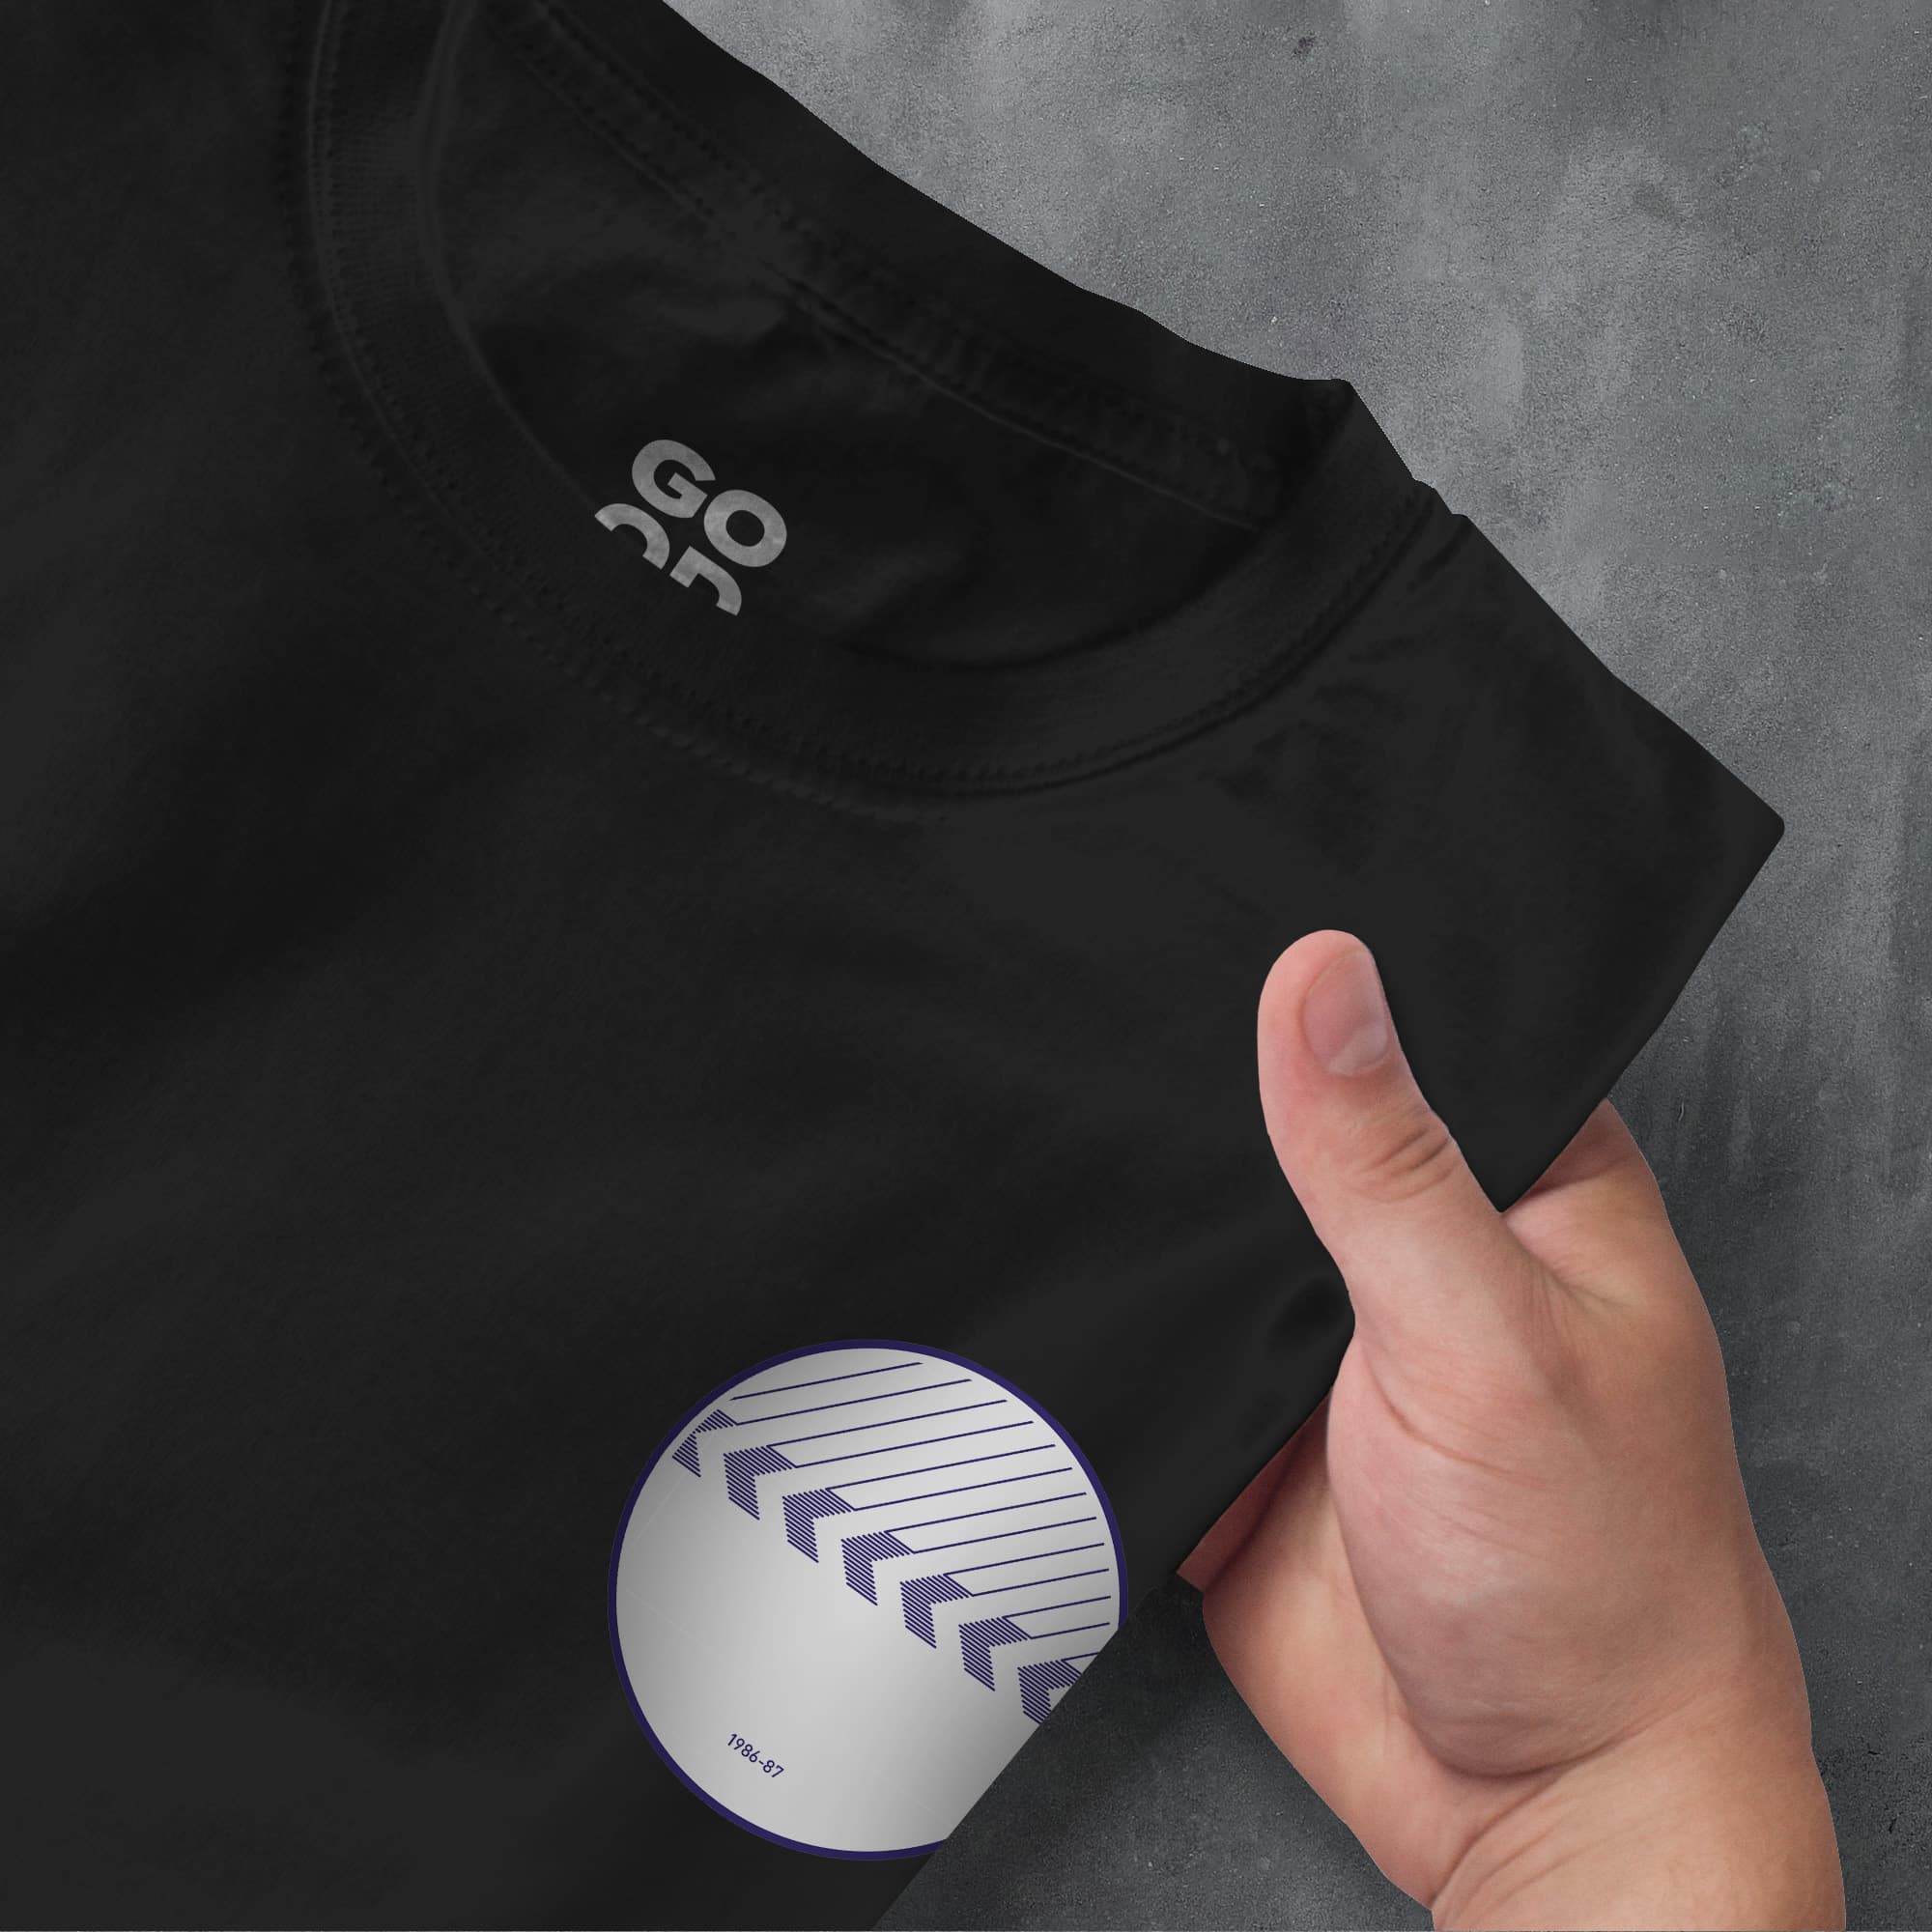 a hand pointing at a t - shirt with the word go as printed on it